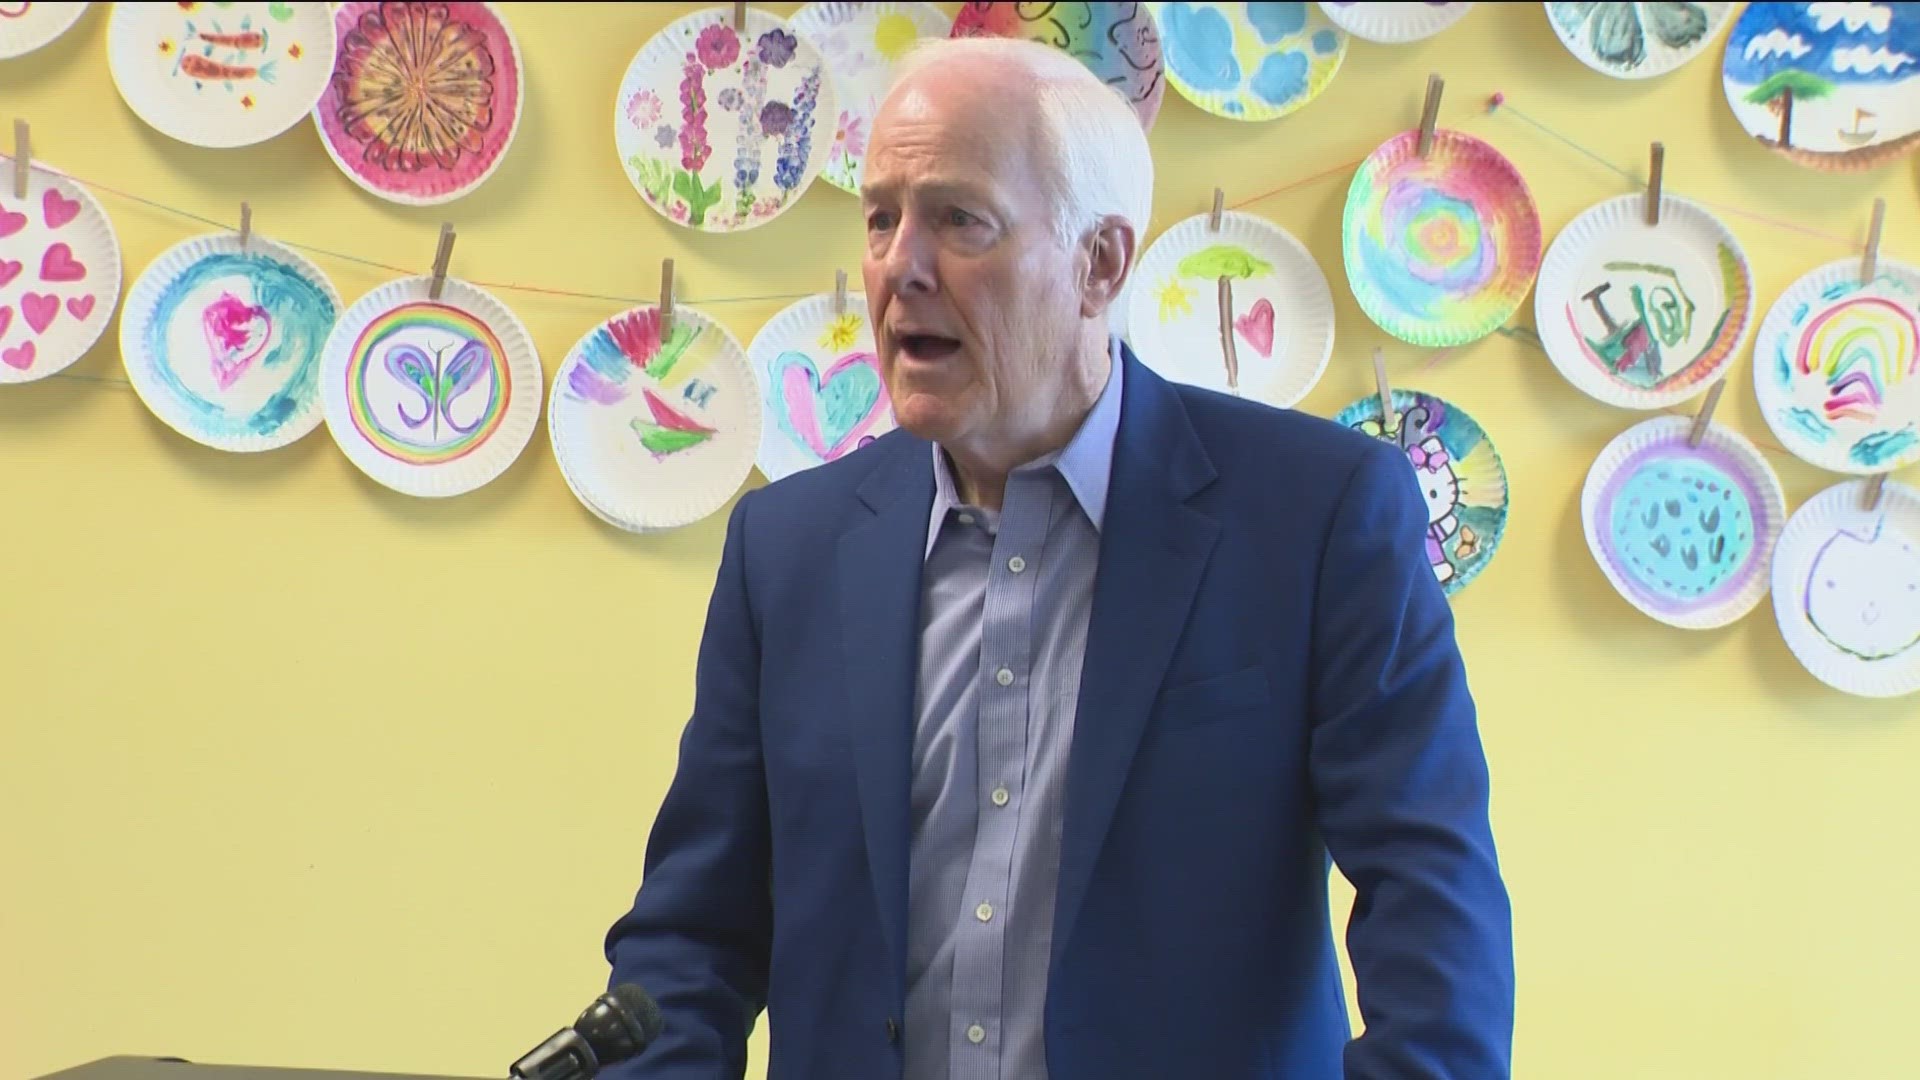 U.S. Sen. John Cornyn told reporters he thinks the legal battle of Senate Bill 4 will have to be decided by the U.S. Supreme Court, not lower courts.